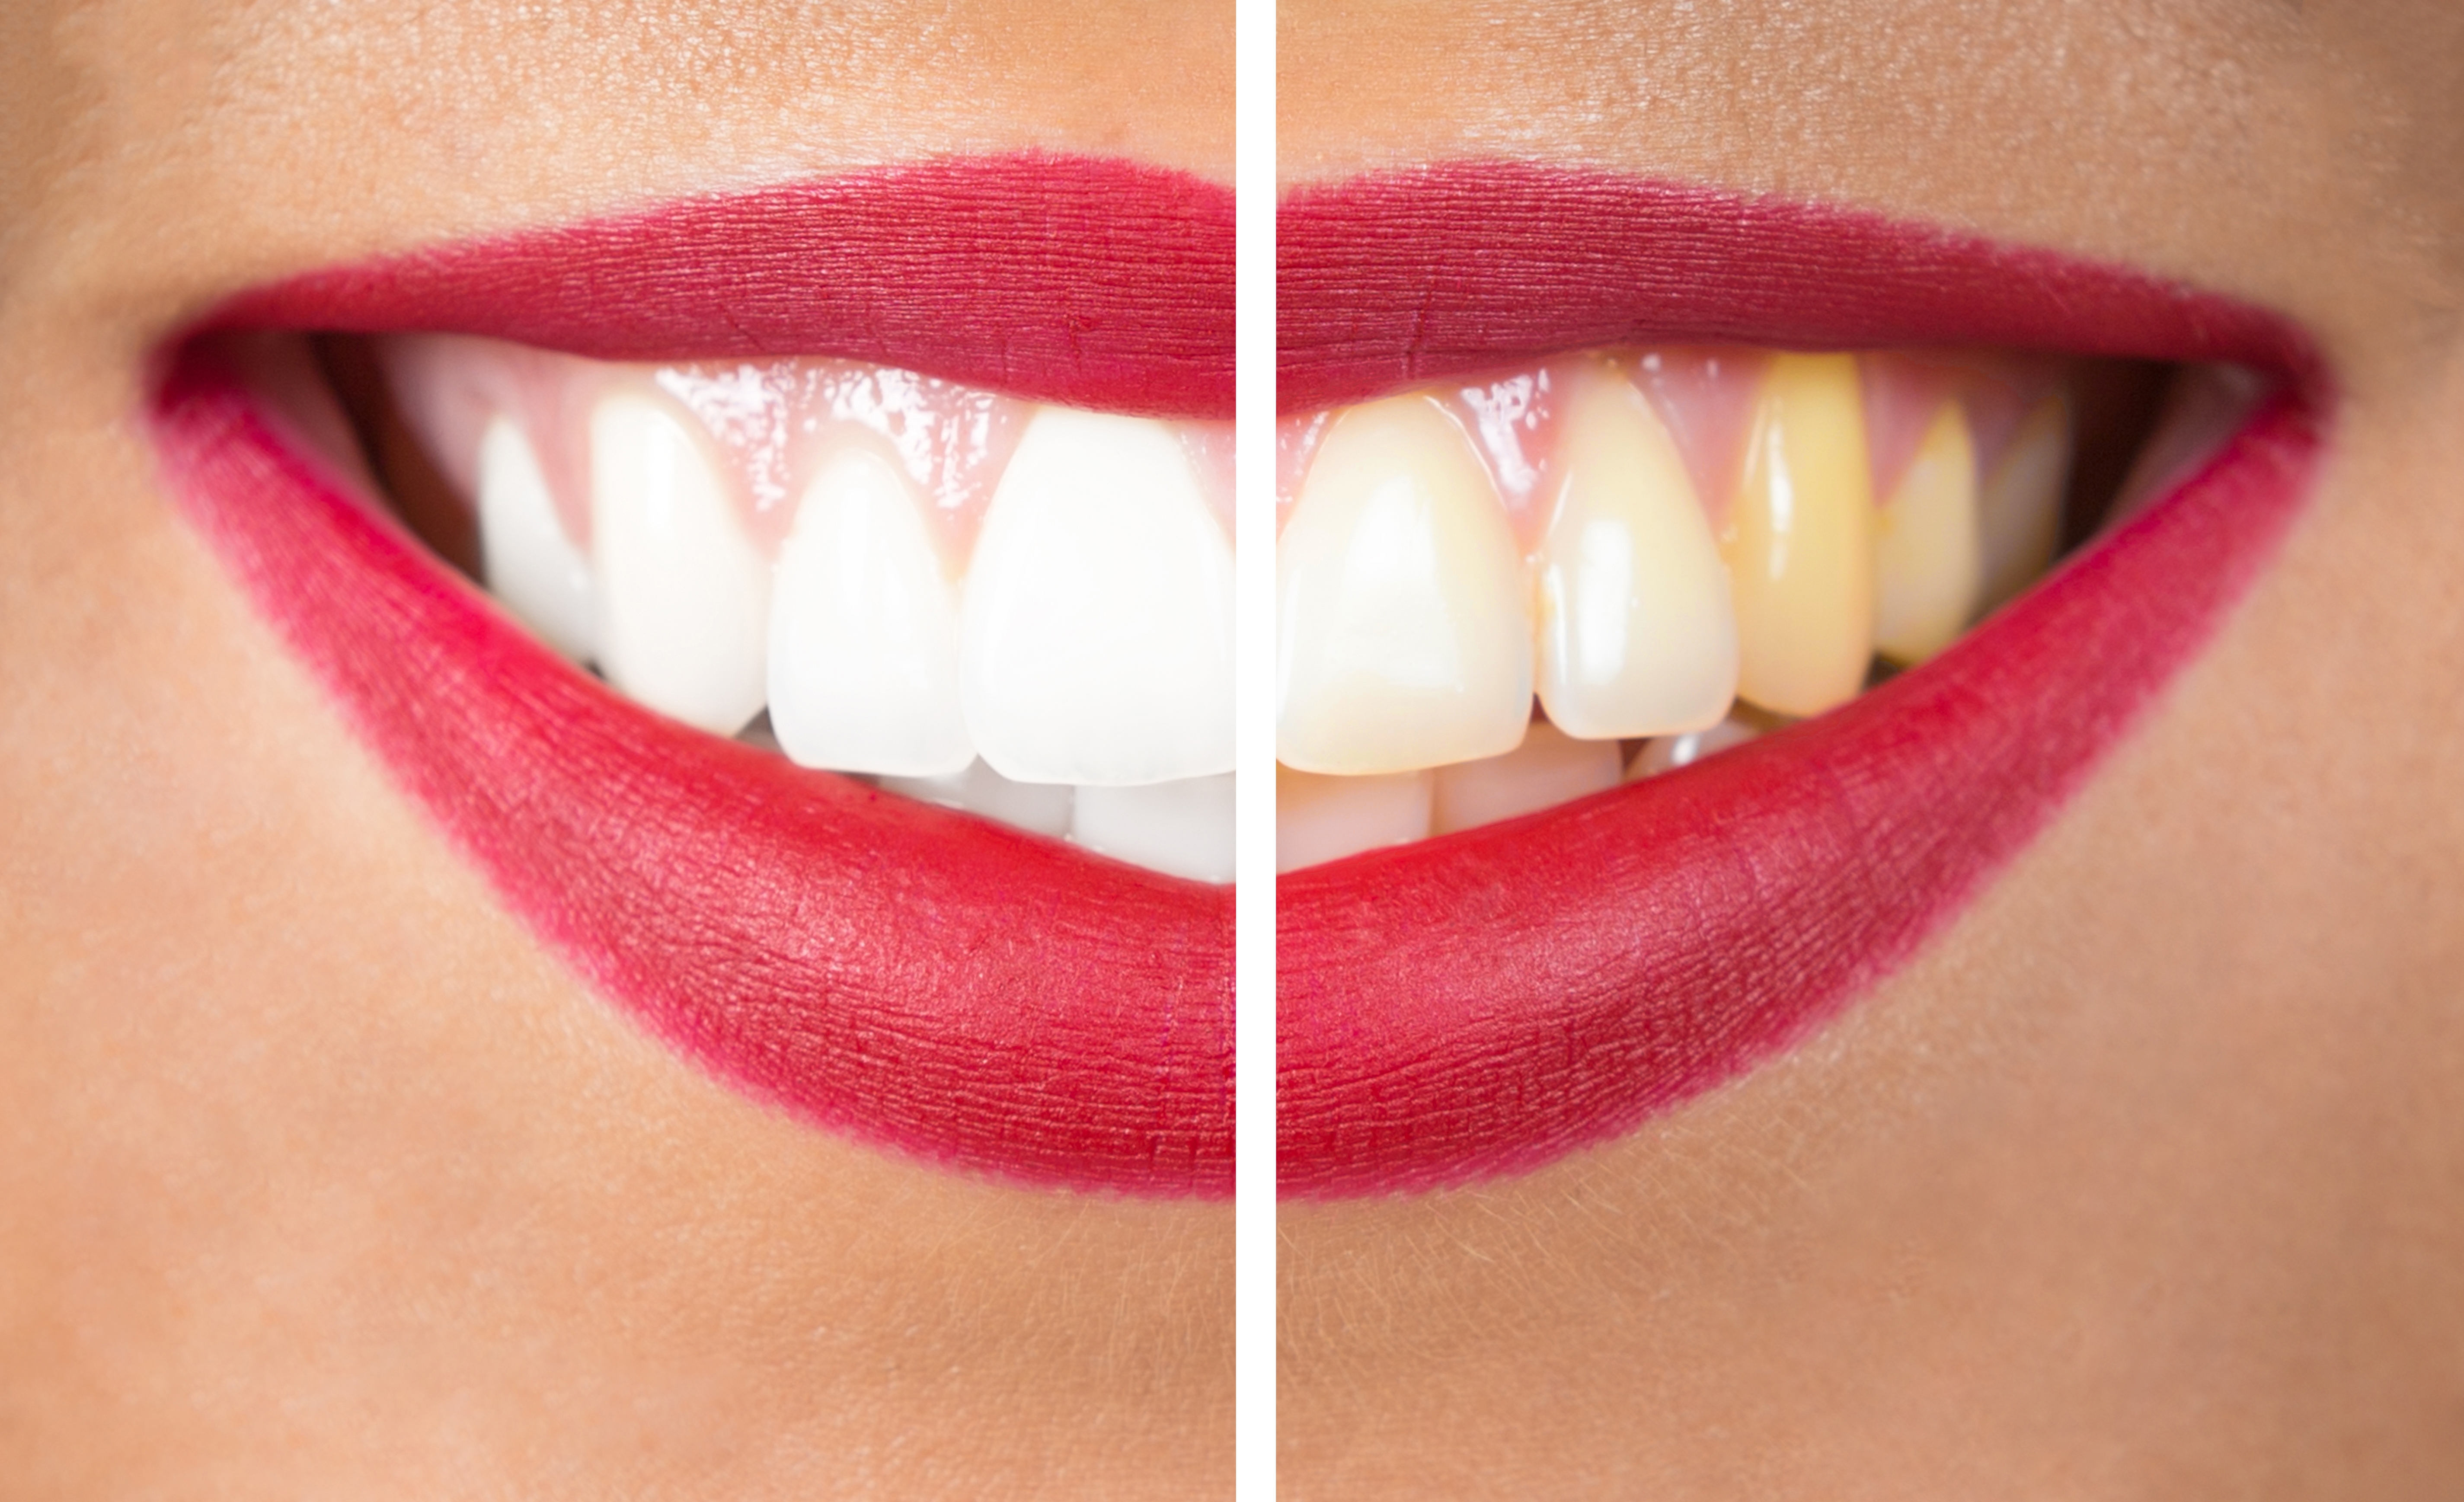 The Best Teeth Whitening Product - Not Discovered In The Dentist's Office!